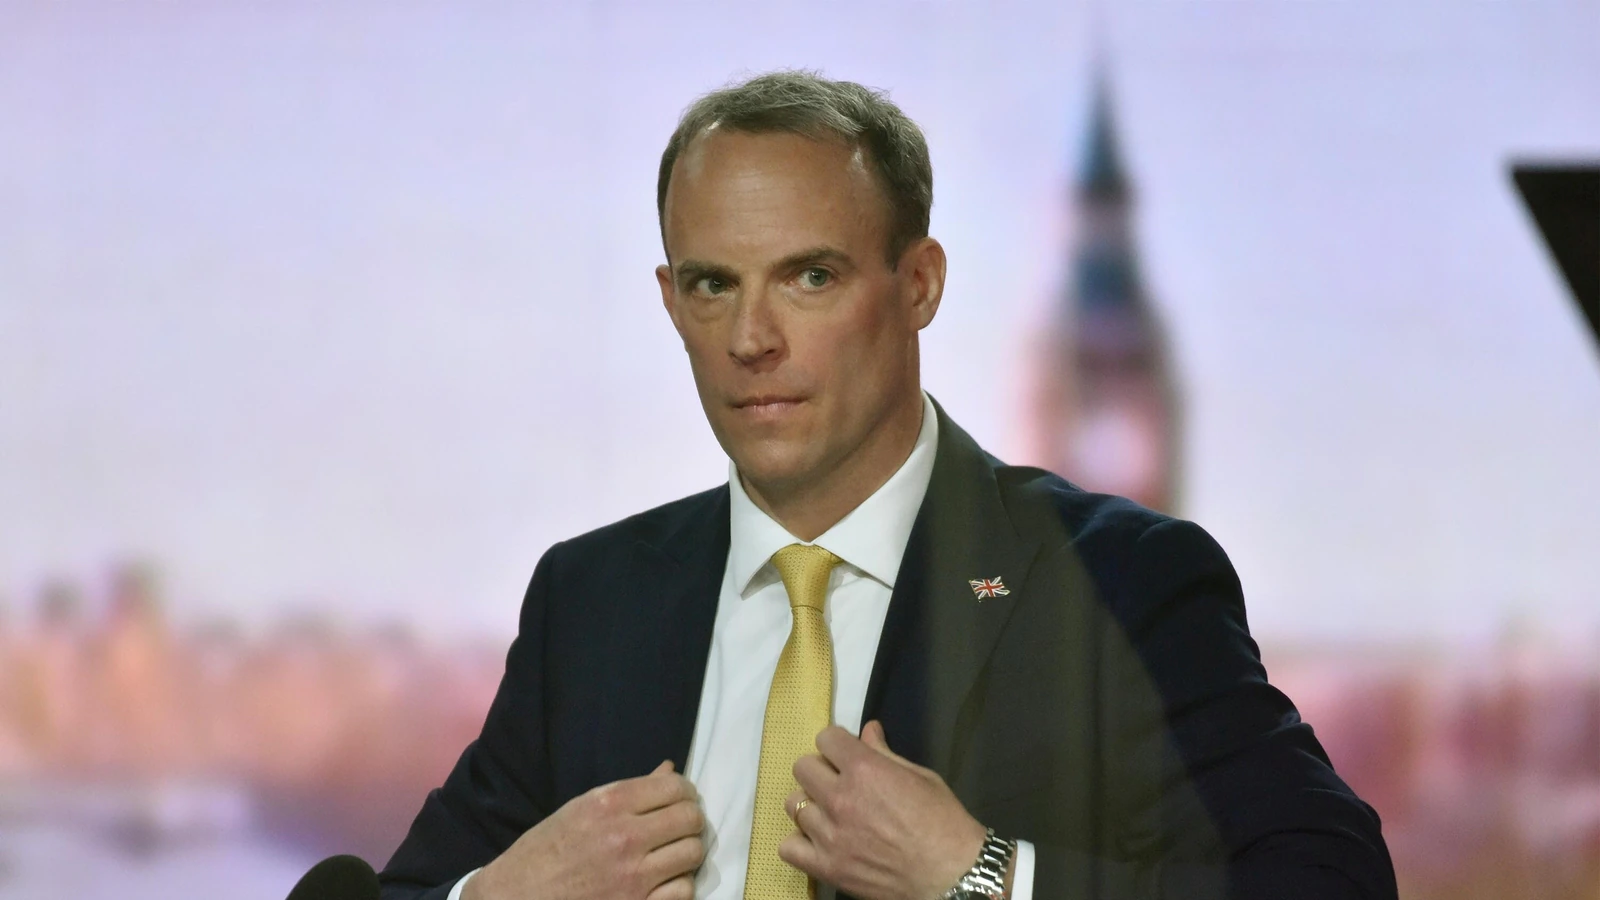 UK’s Raab assures India help with ‘whatever they ask for’, says vaccine demand ‘hypothetical’